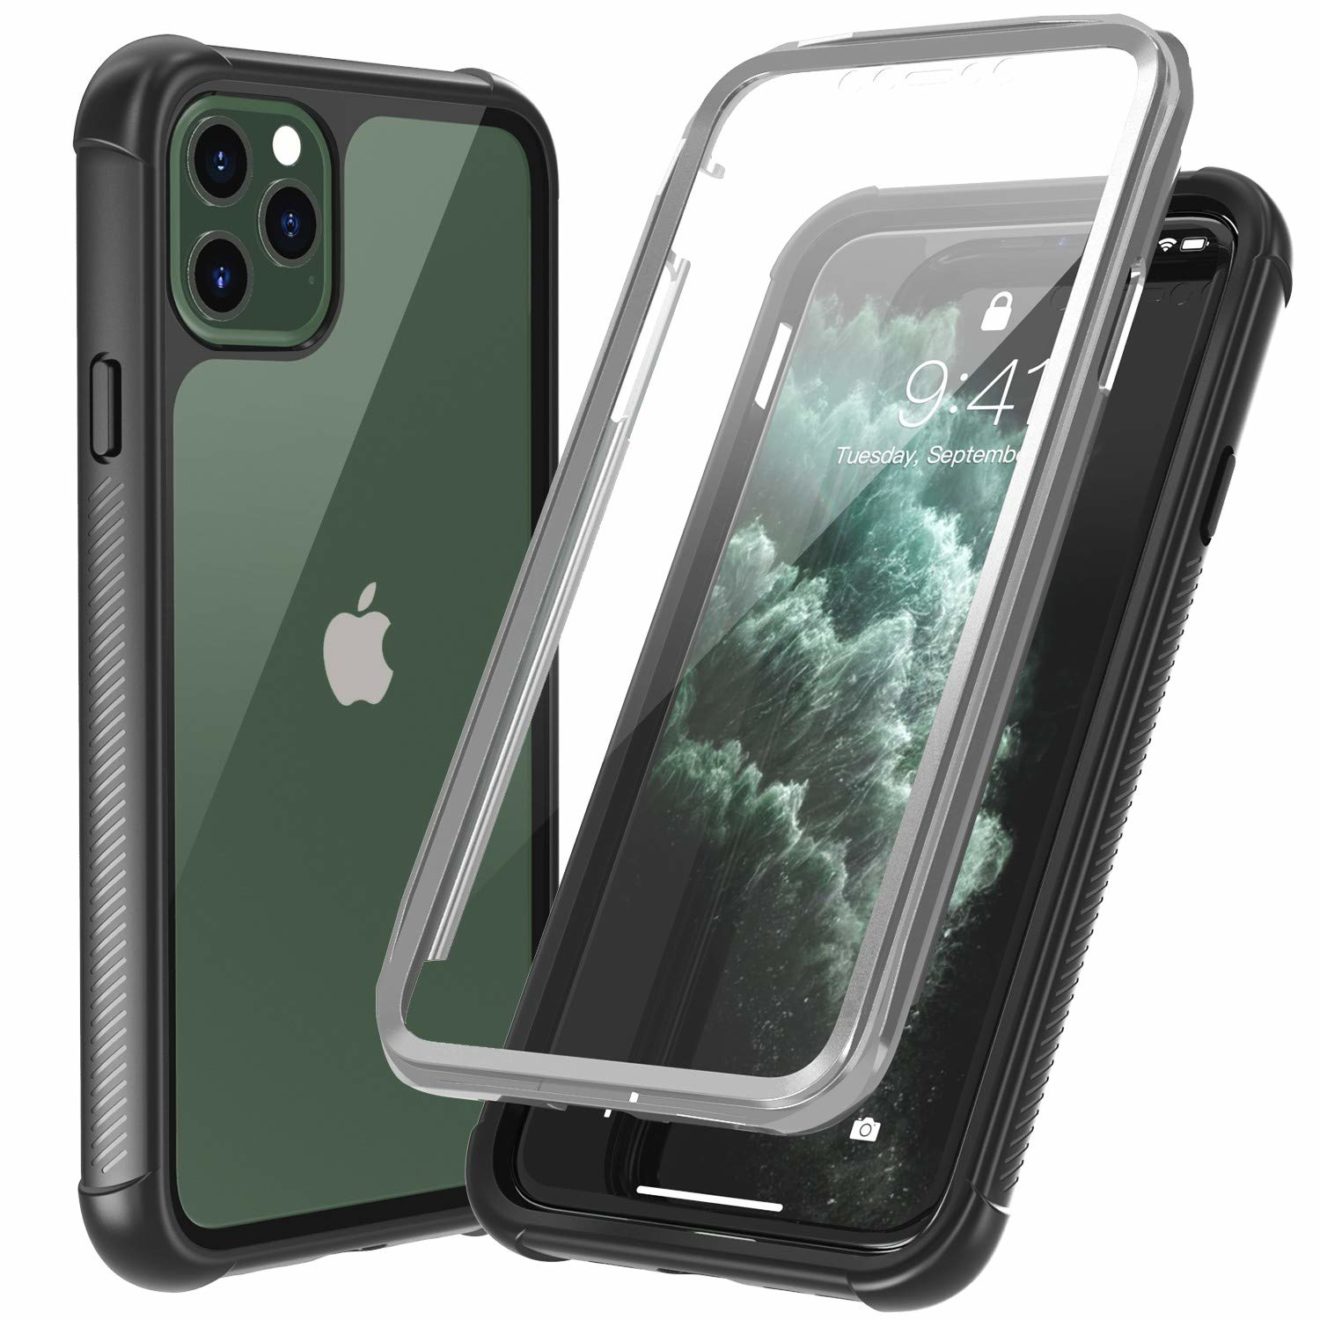 Best iPhone 11 Pro Max Cases & Covers To Shield Your ...